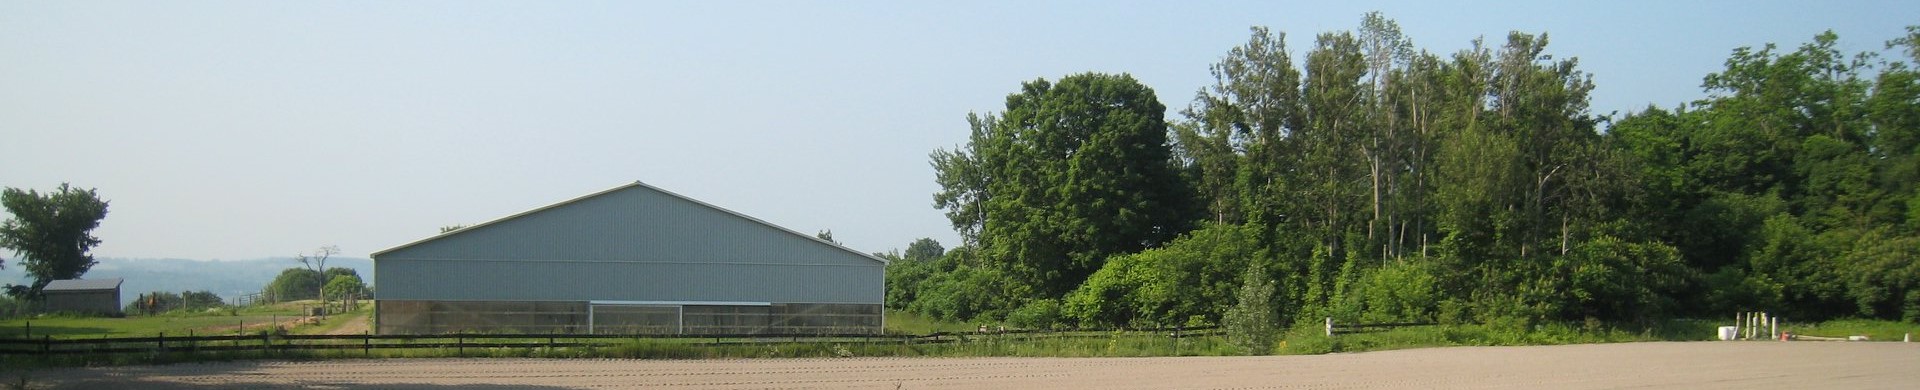 High Pointe Stables